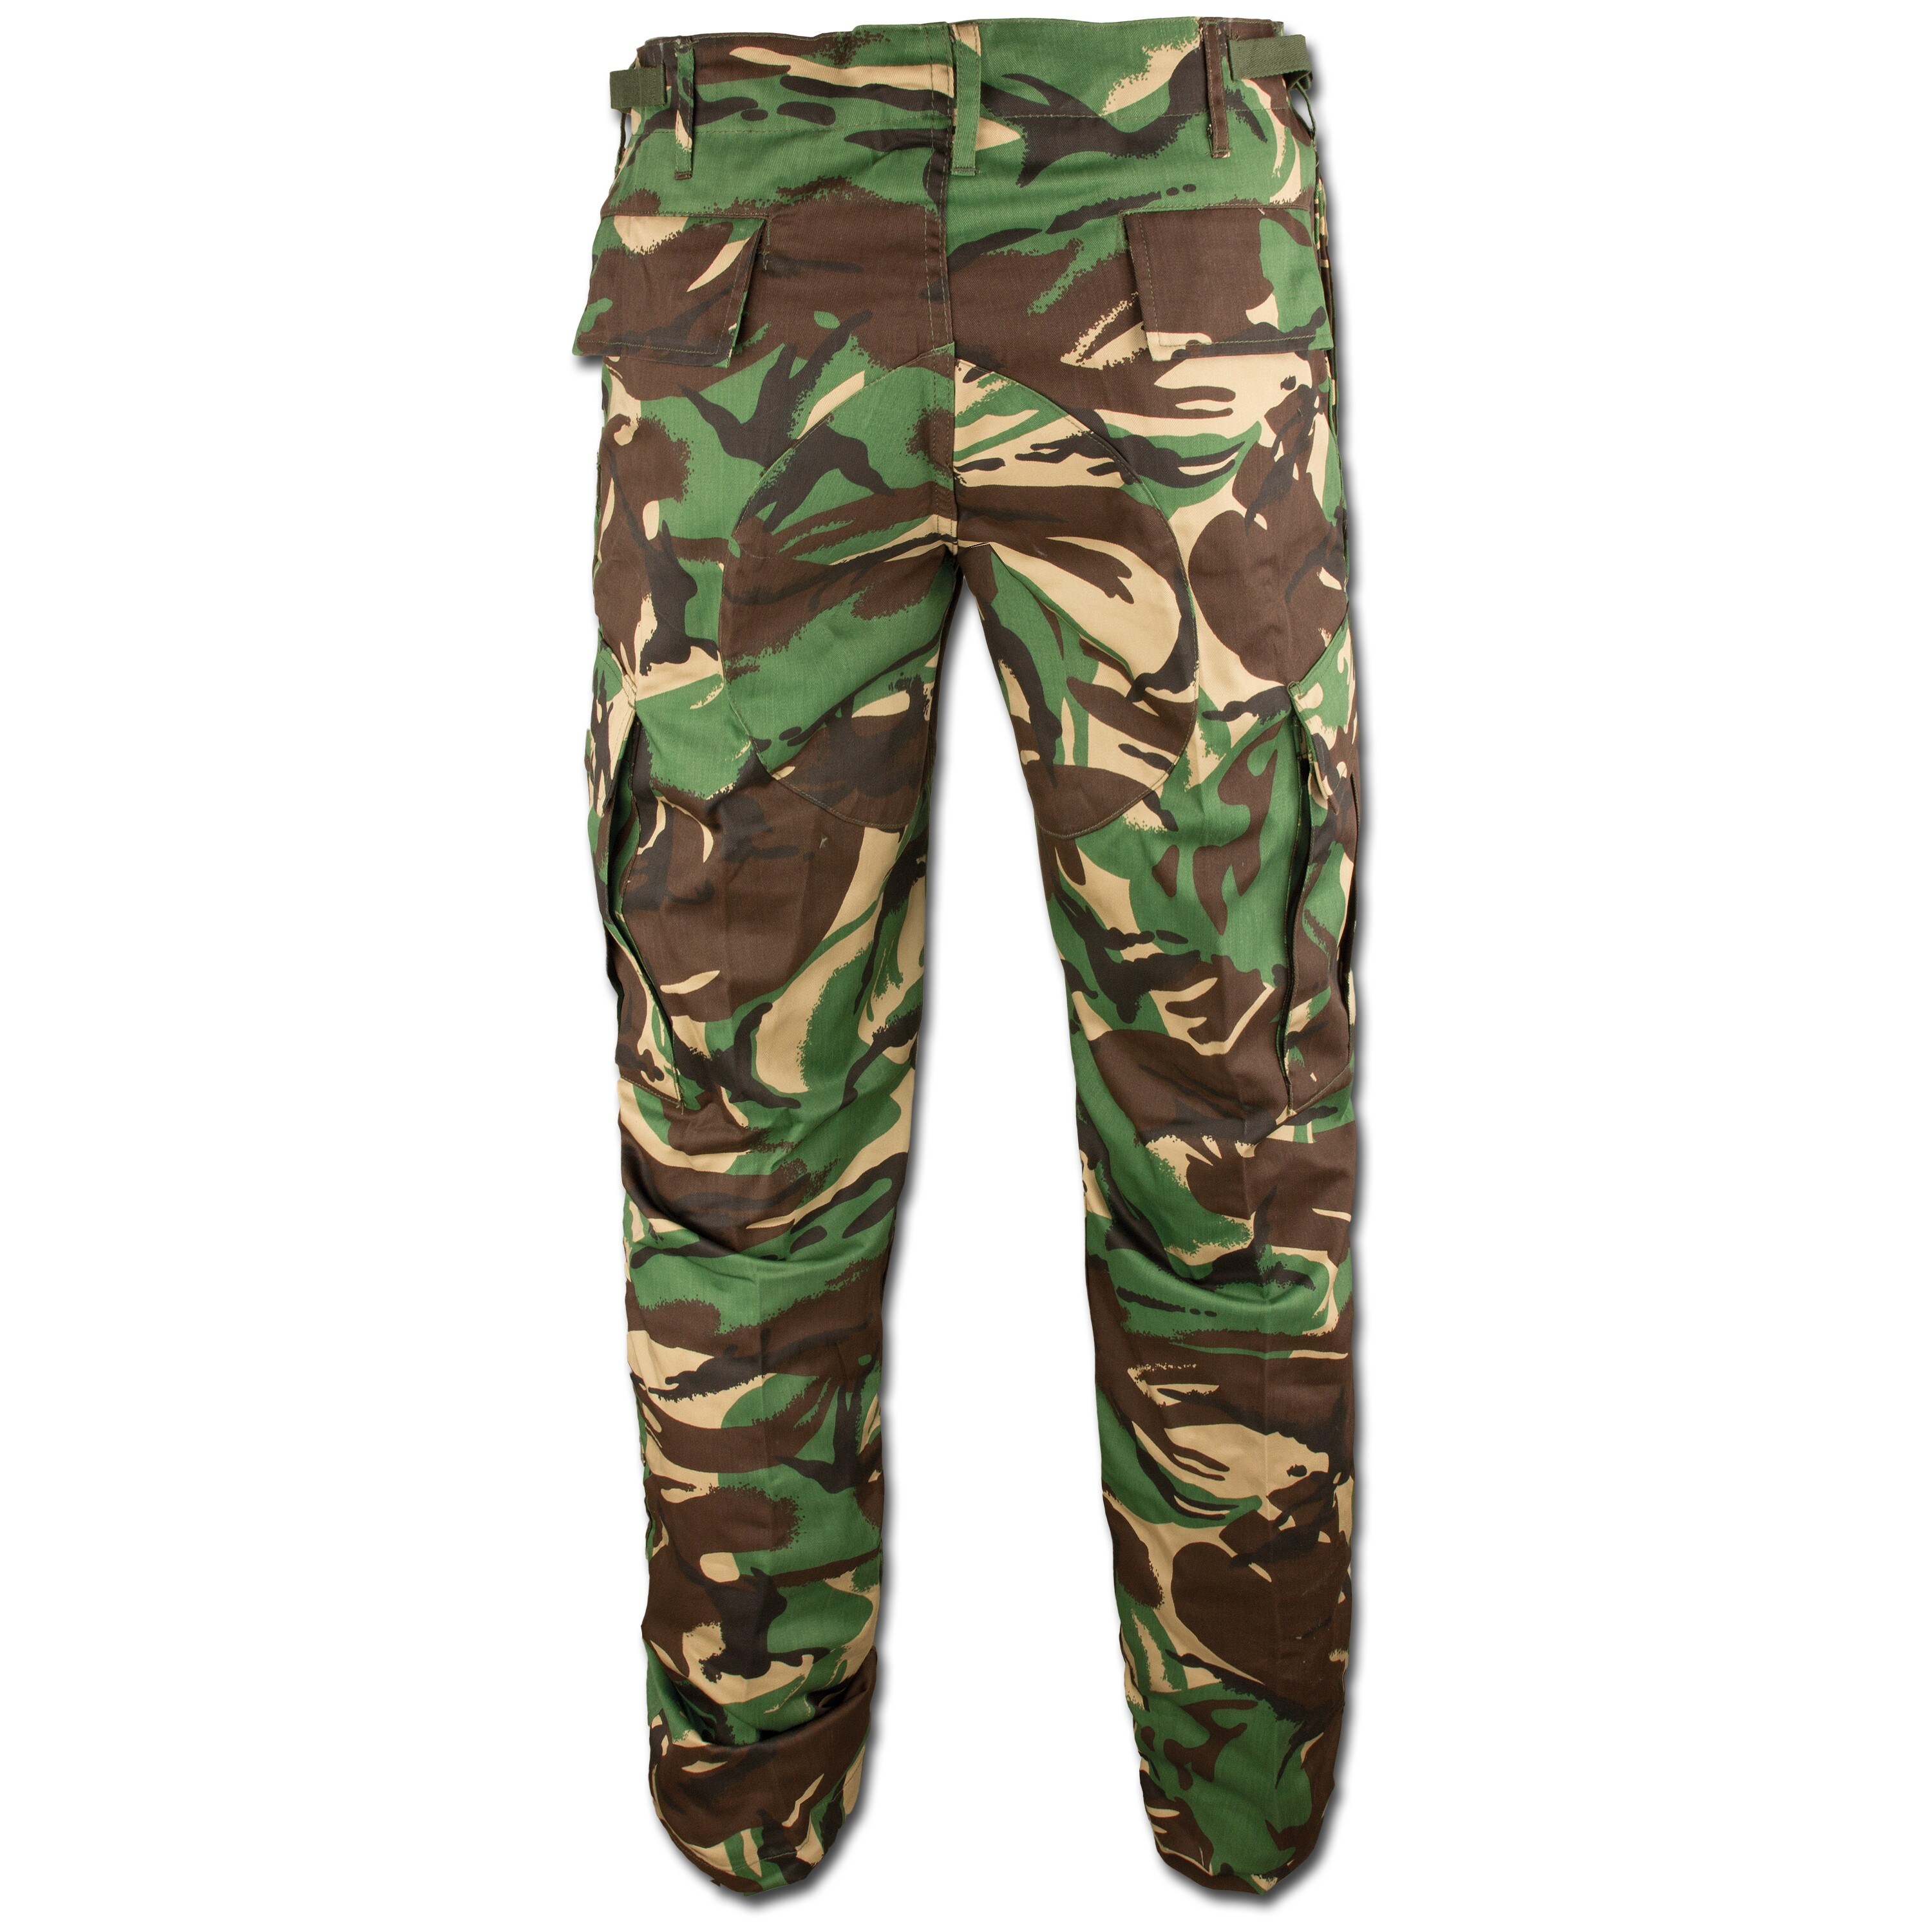 Purchase the U.S. Field Pants BDU Style DPM camo by ASMC